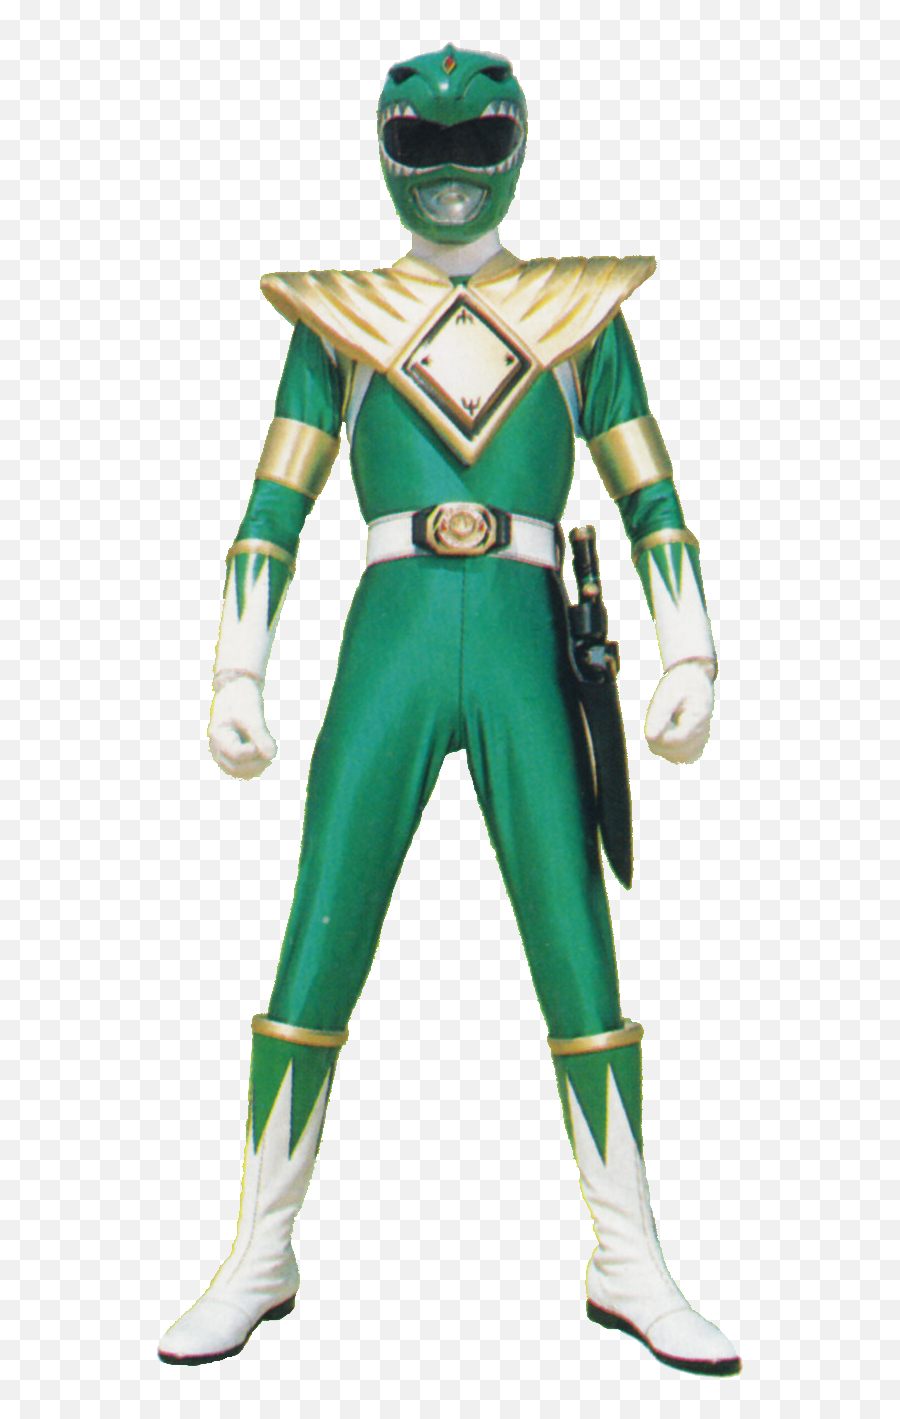 What Do The Power Rangers Colors Mean - Quora Green Power Rangers Mighty Morphin Emoji,Colors Emotions Chameleon Character